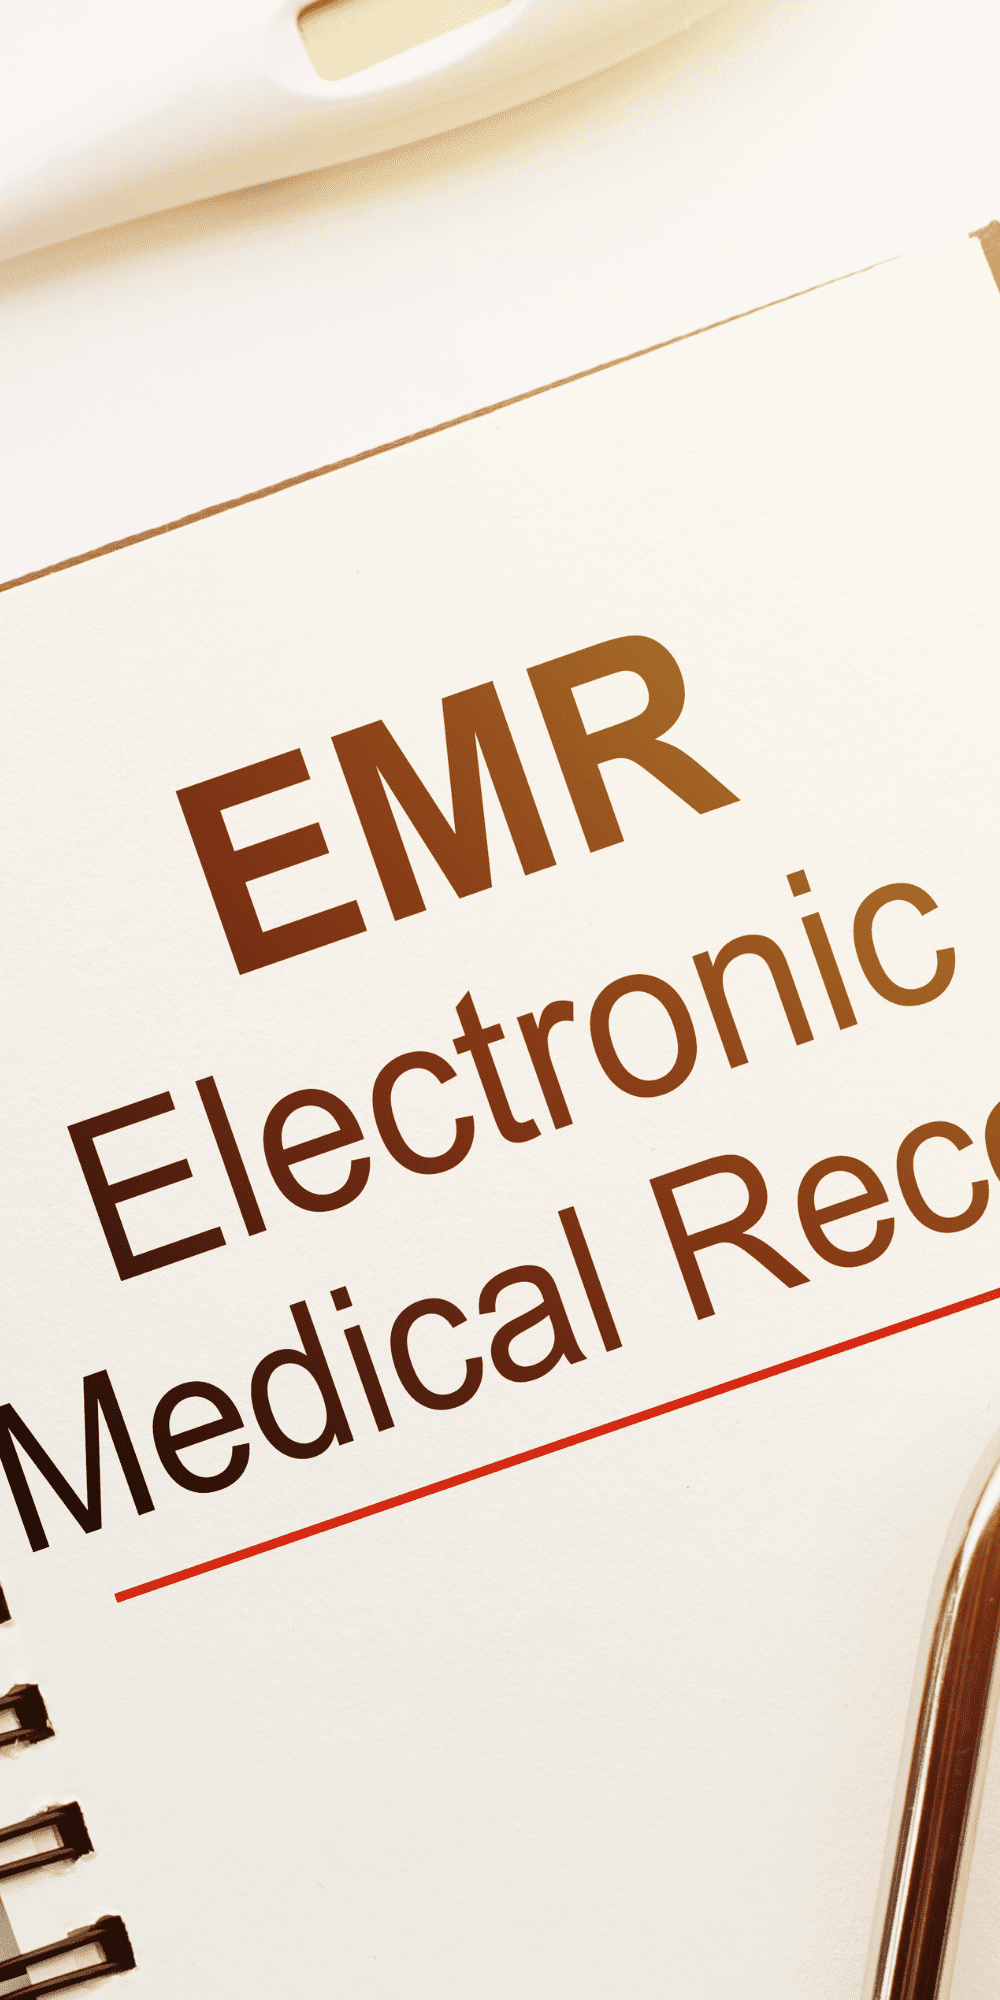 Electronic Medical Records System in Today’s Market